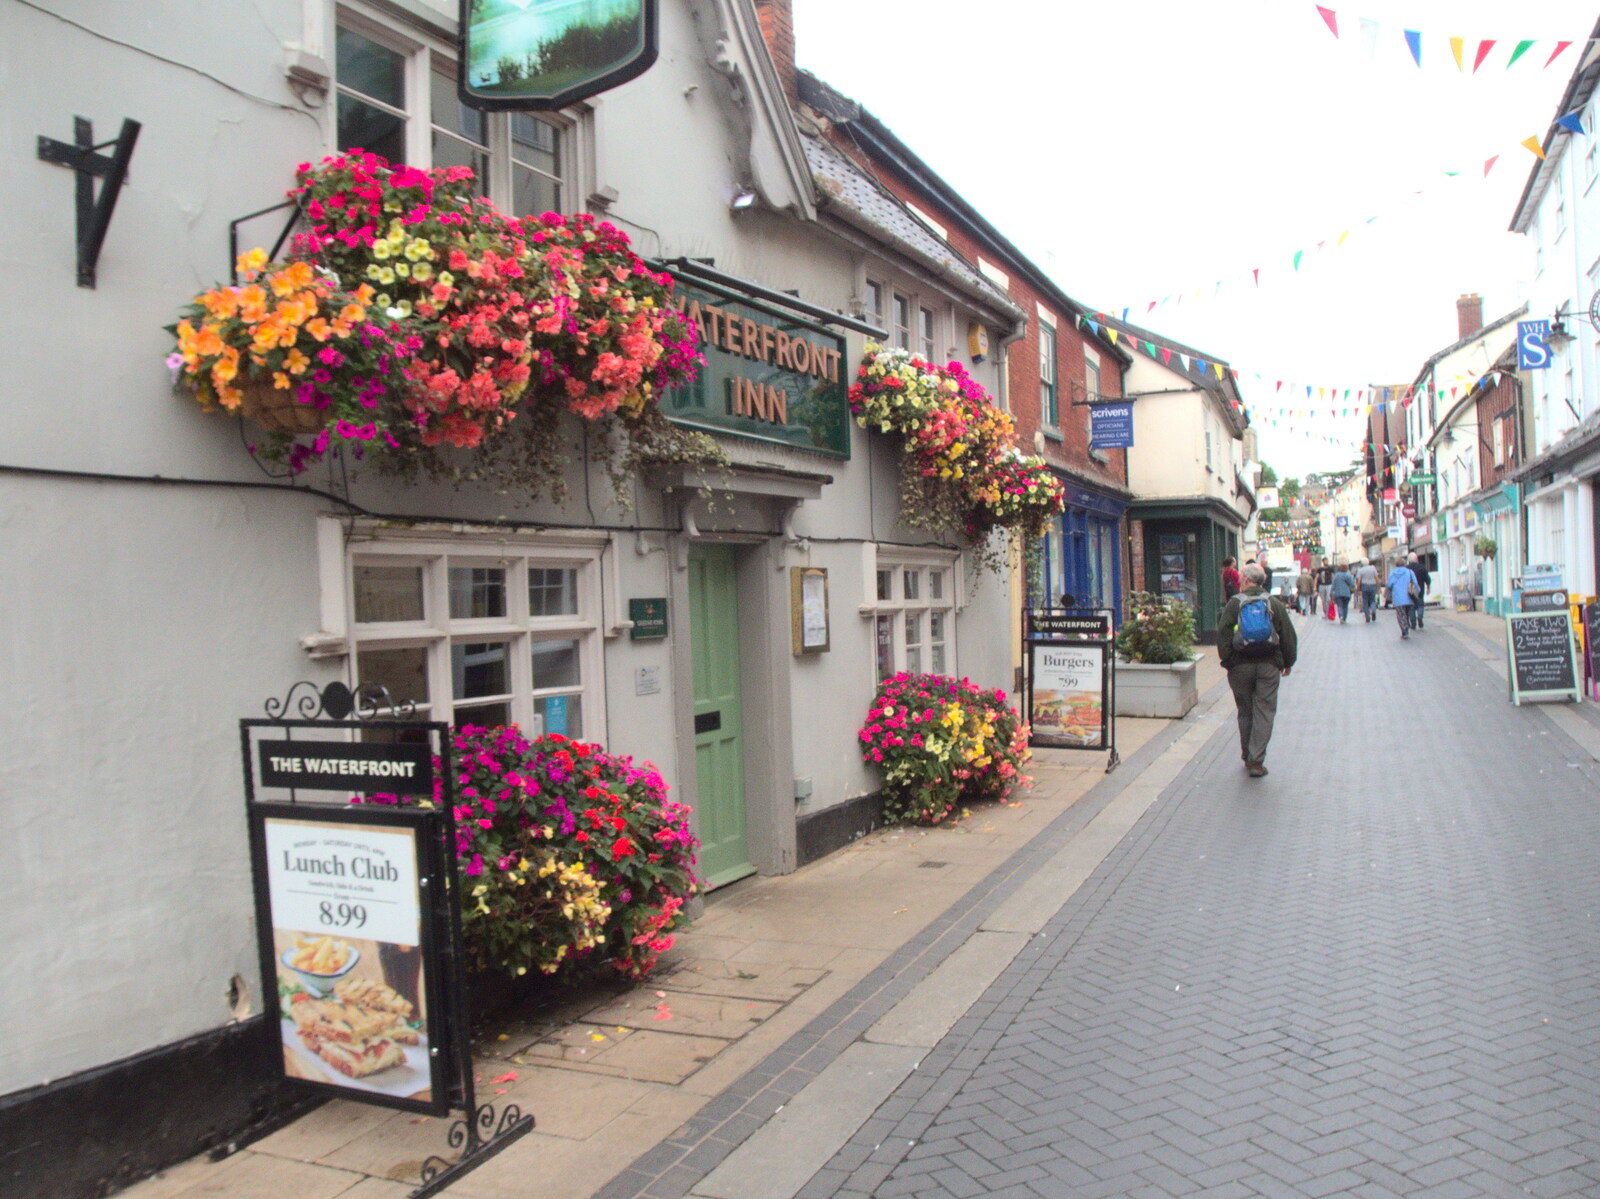 The Waterfront has a nice flower display on from A Few Hours at the Fair, Fair Green, Diss, Norfolk - 5th September 2021